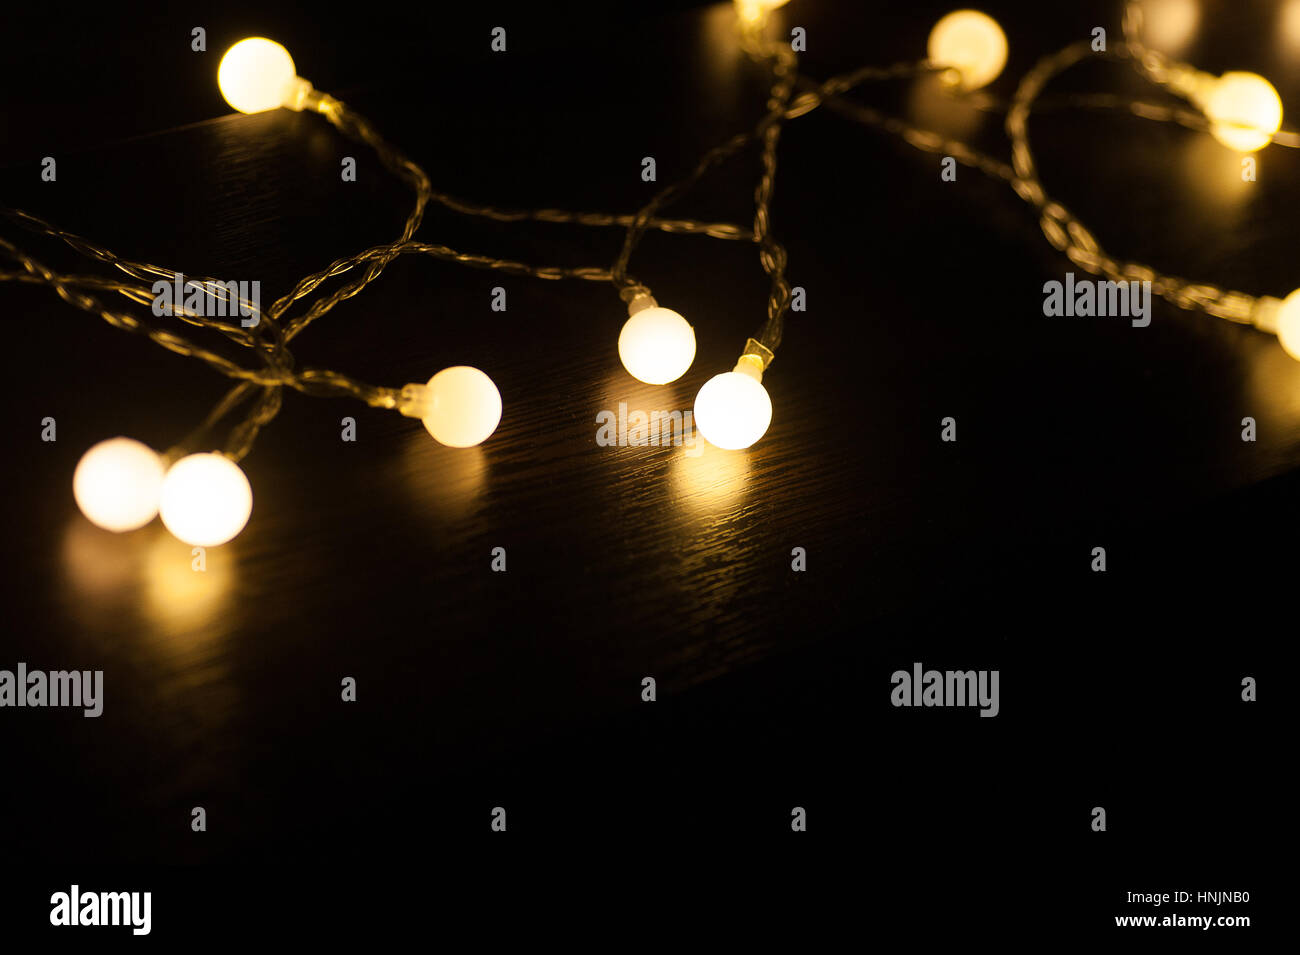 included a garland on a dark background Stock Photo